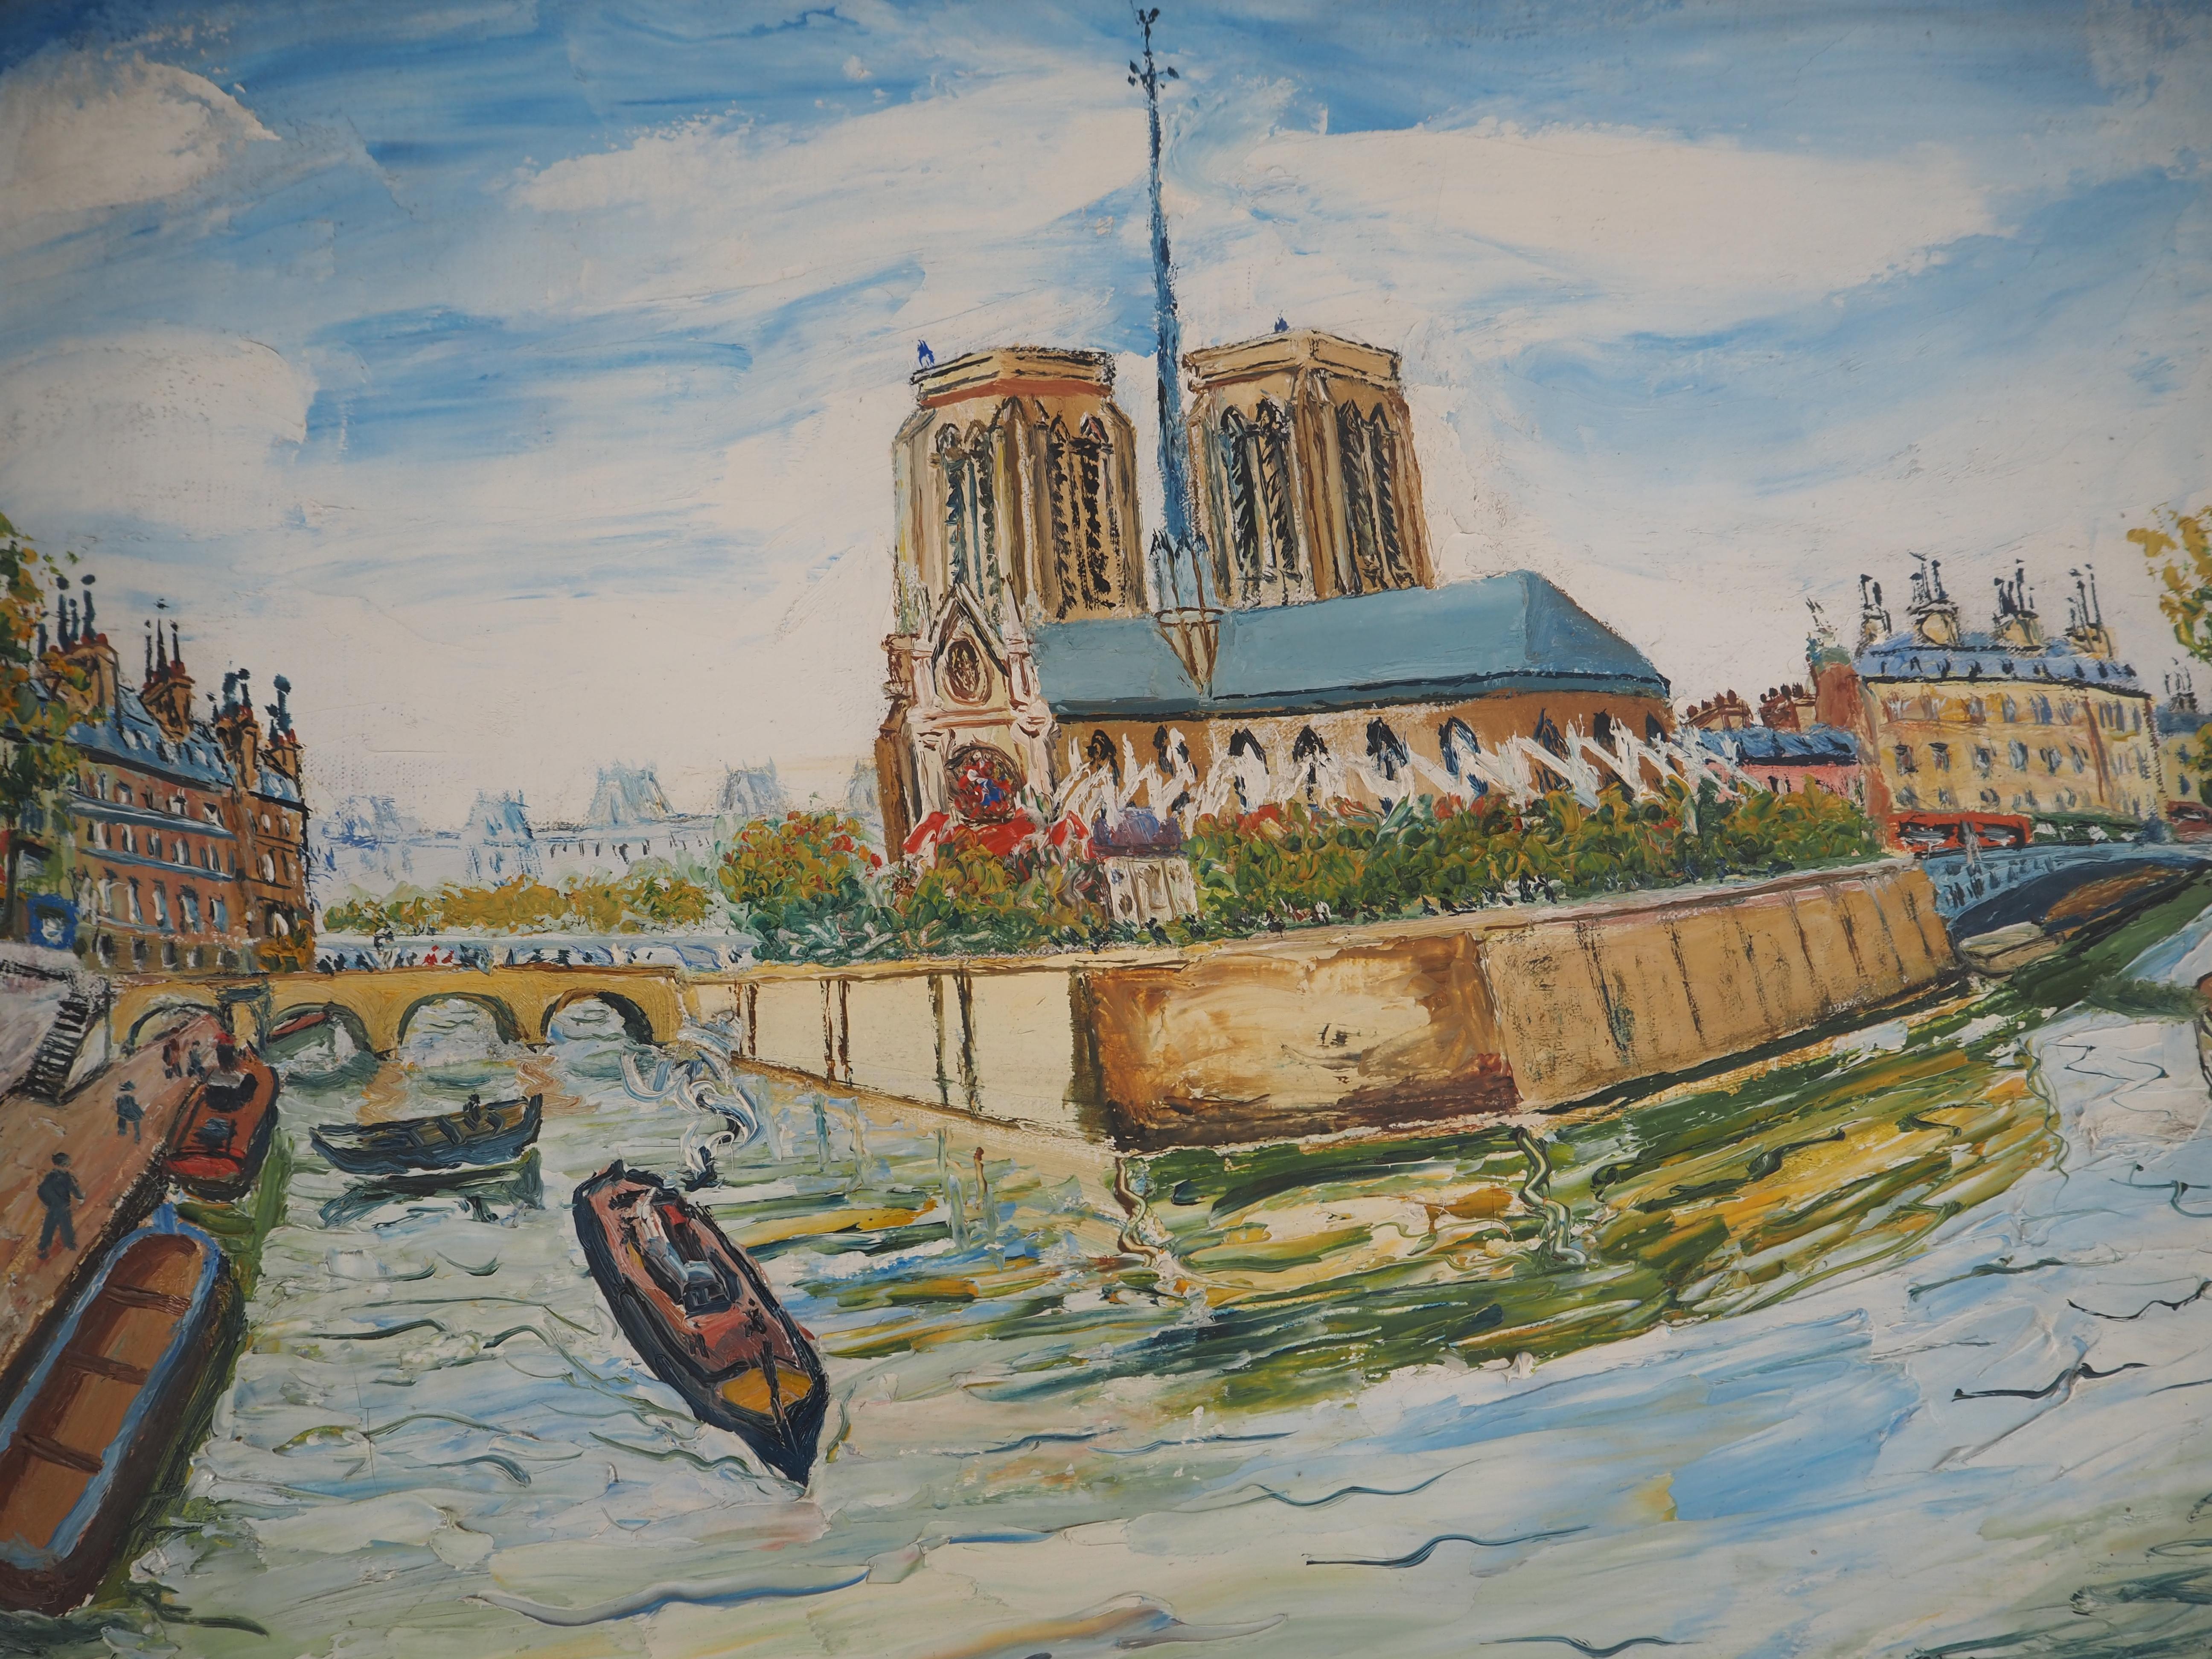 Summer in Paris : Notre Dame Church and Seine River - Oil on canvas - Signed - Post-Impressionist Painting by Elisée Maclet